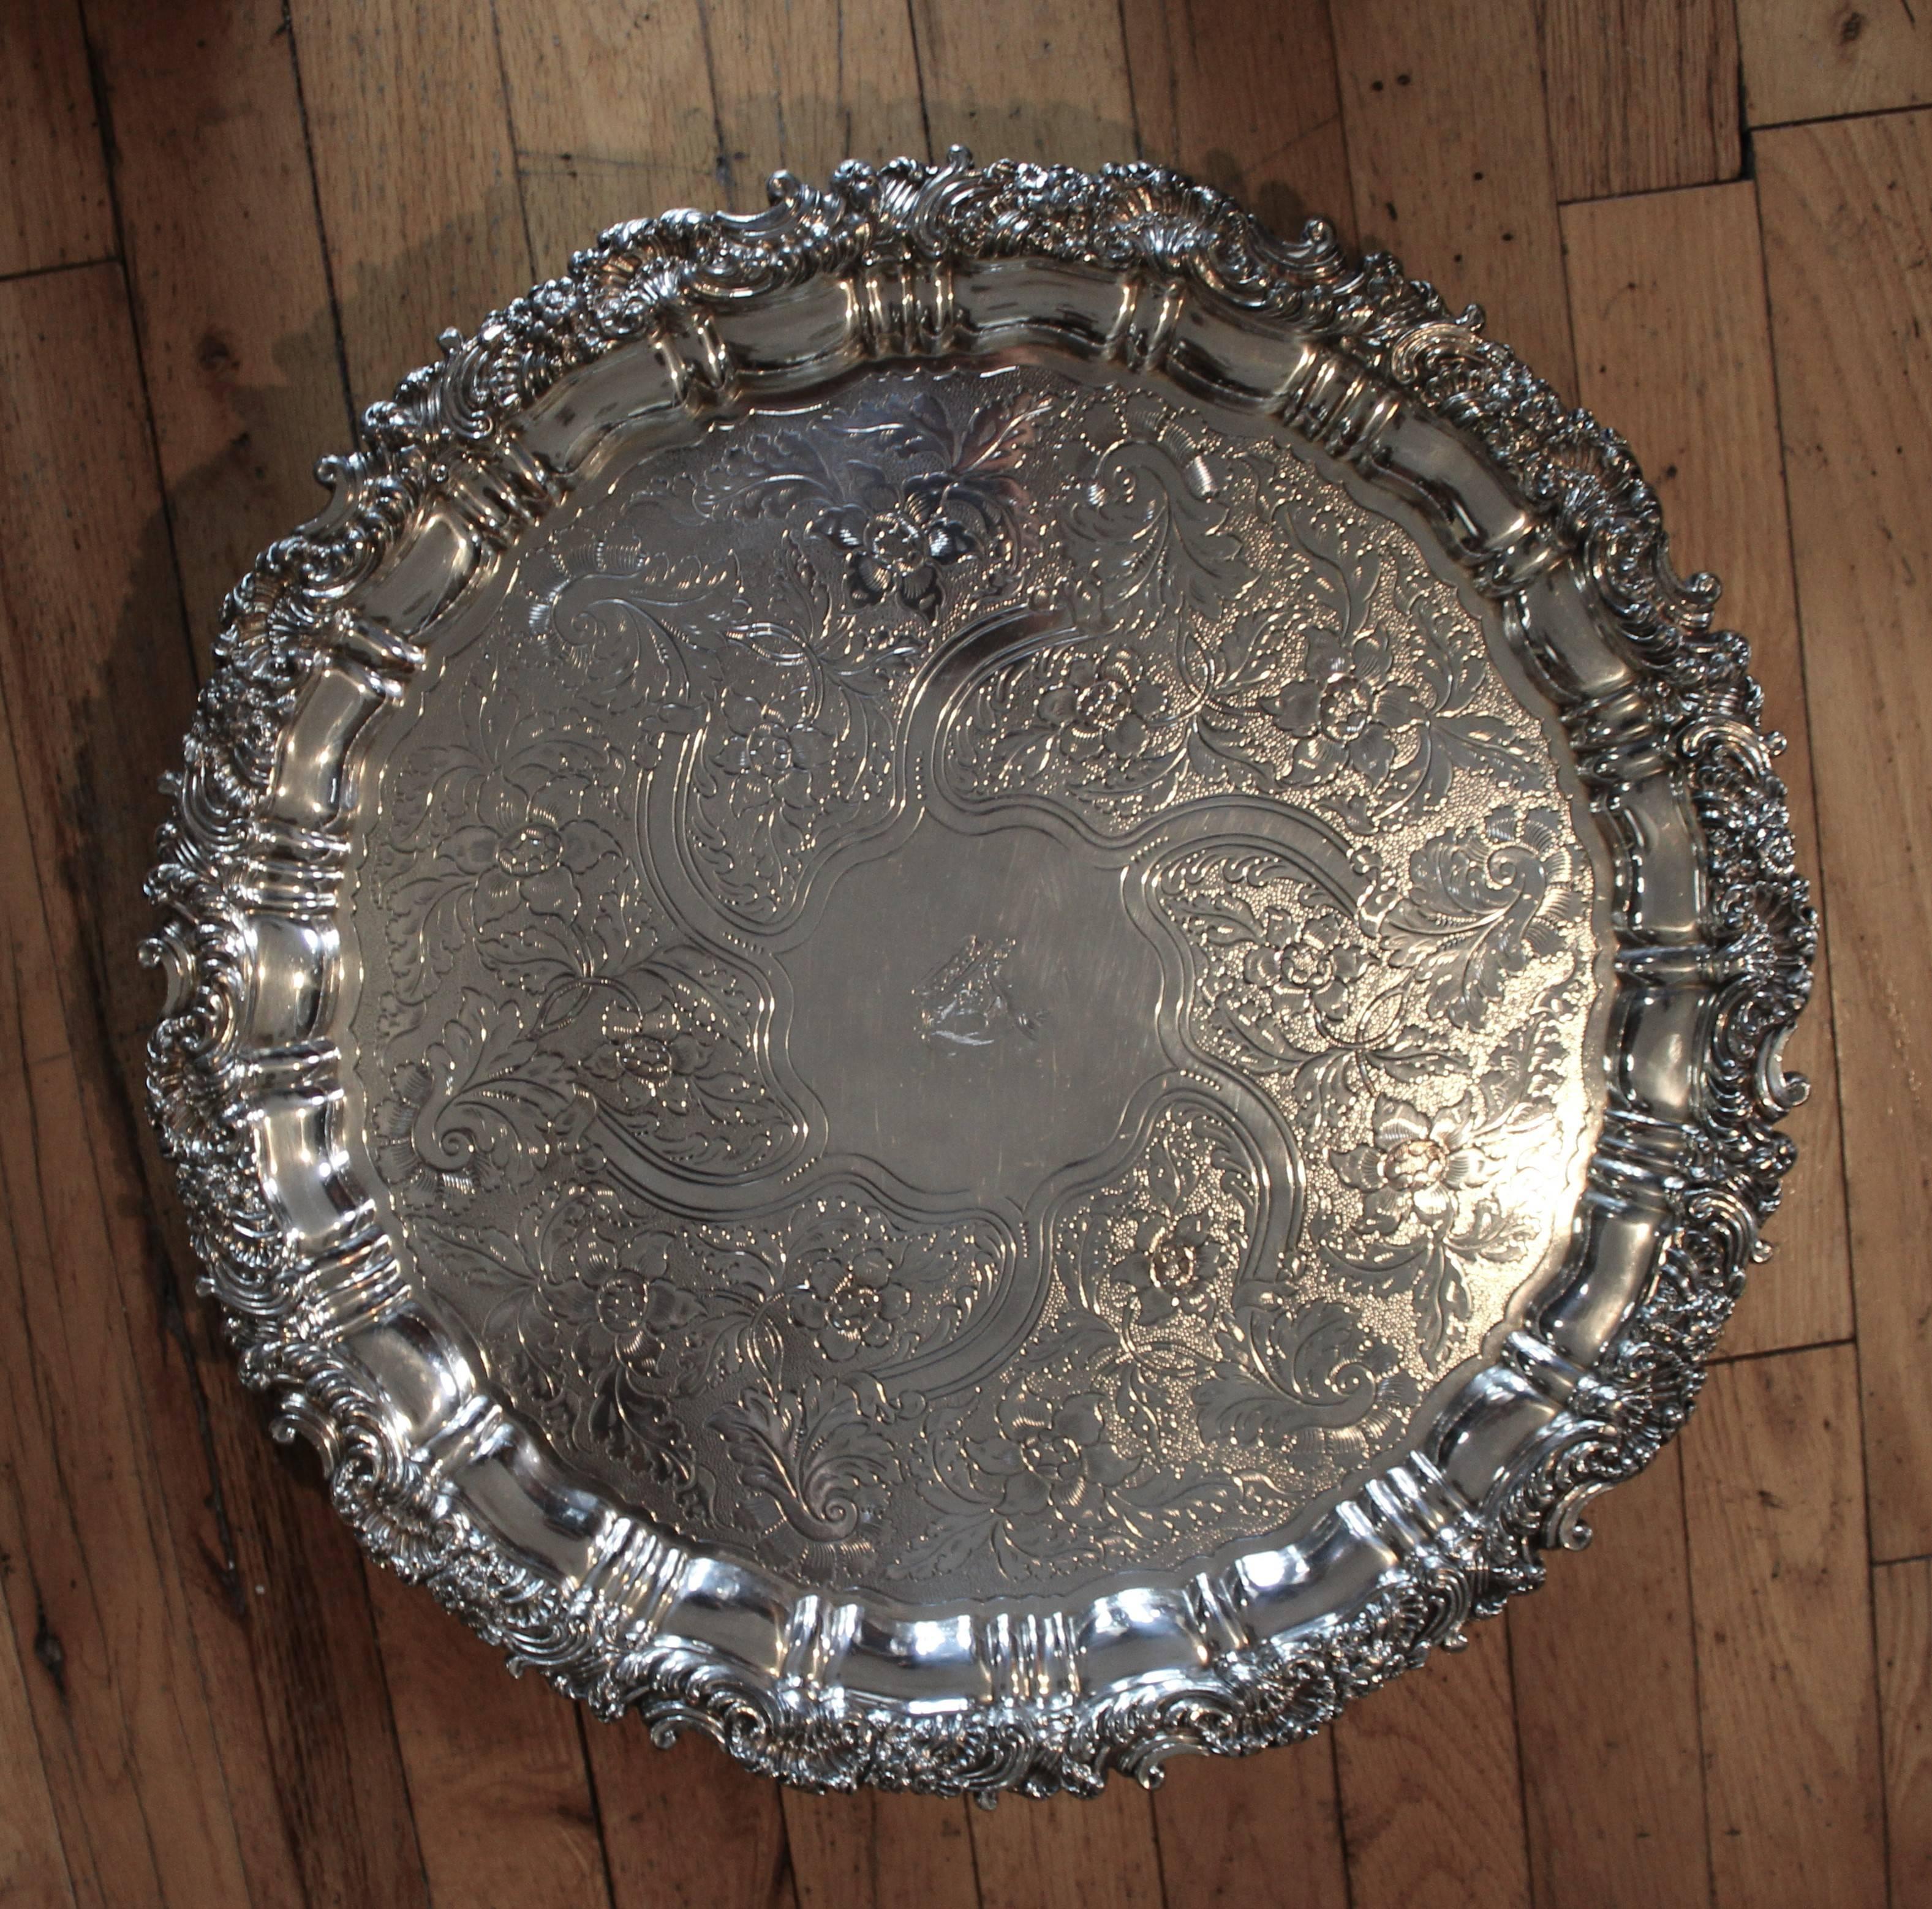 Sheffield Silver Plated Crested Salver Early 19th Century For Sale 1